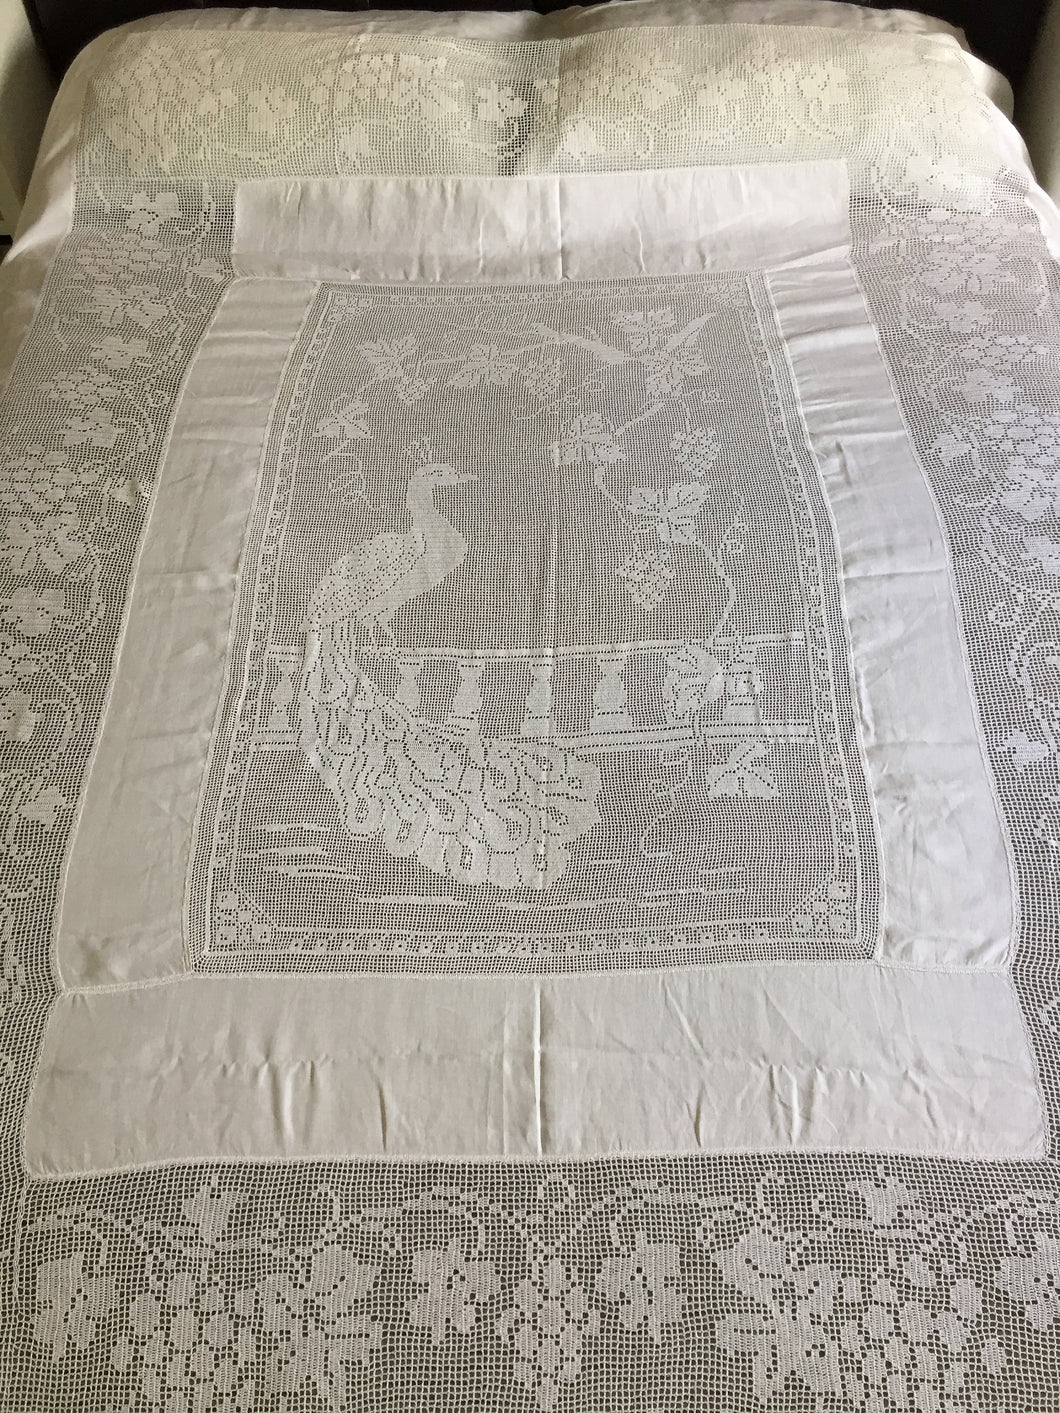 Vintage Lace and Linen Bed Cover with Mary Card Designed Filet Crochet Inlay 